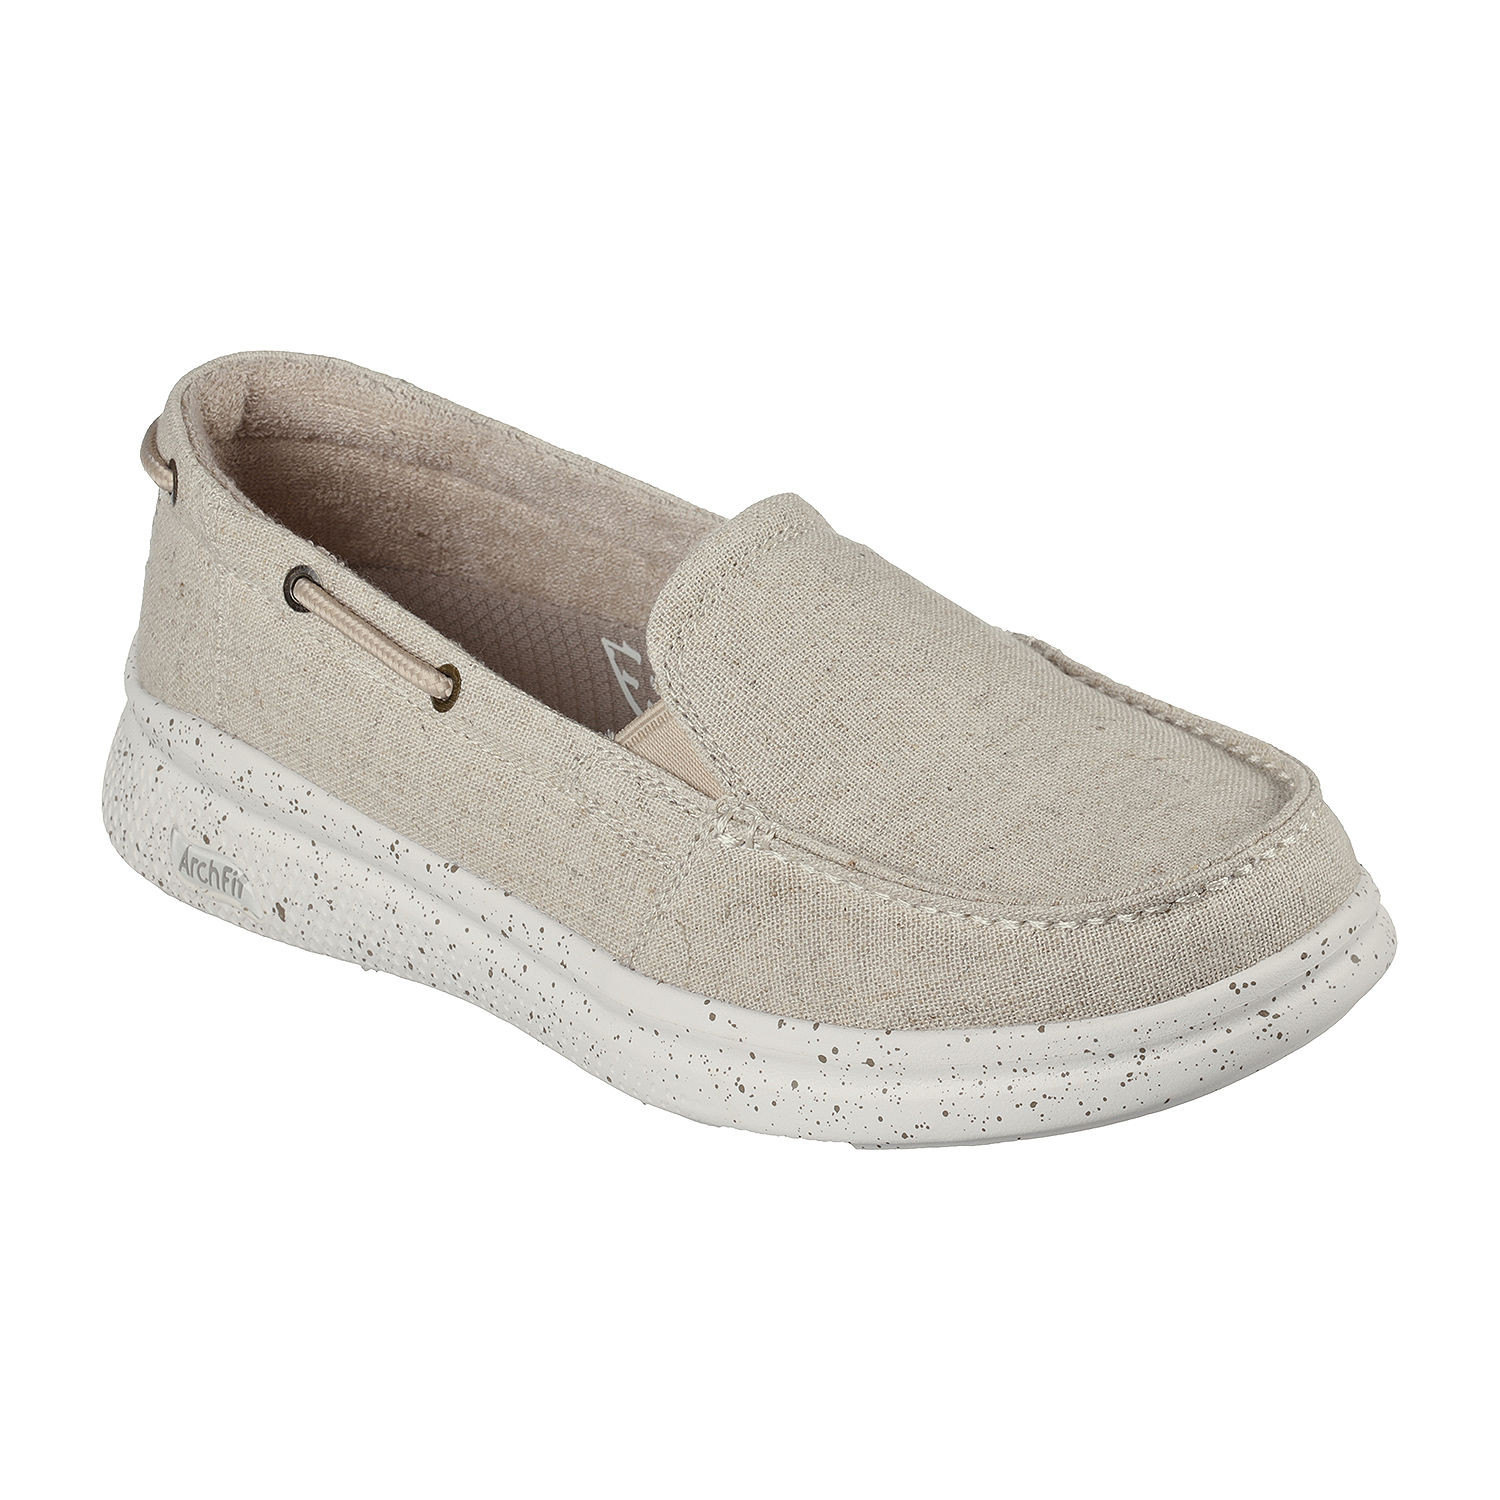 Skechers Bobs Womens Bobs Arch Fit Beyond Swell Slip-On Shoe, Color ...